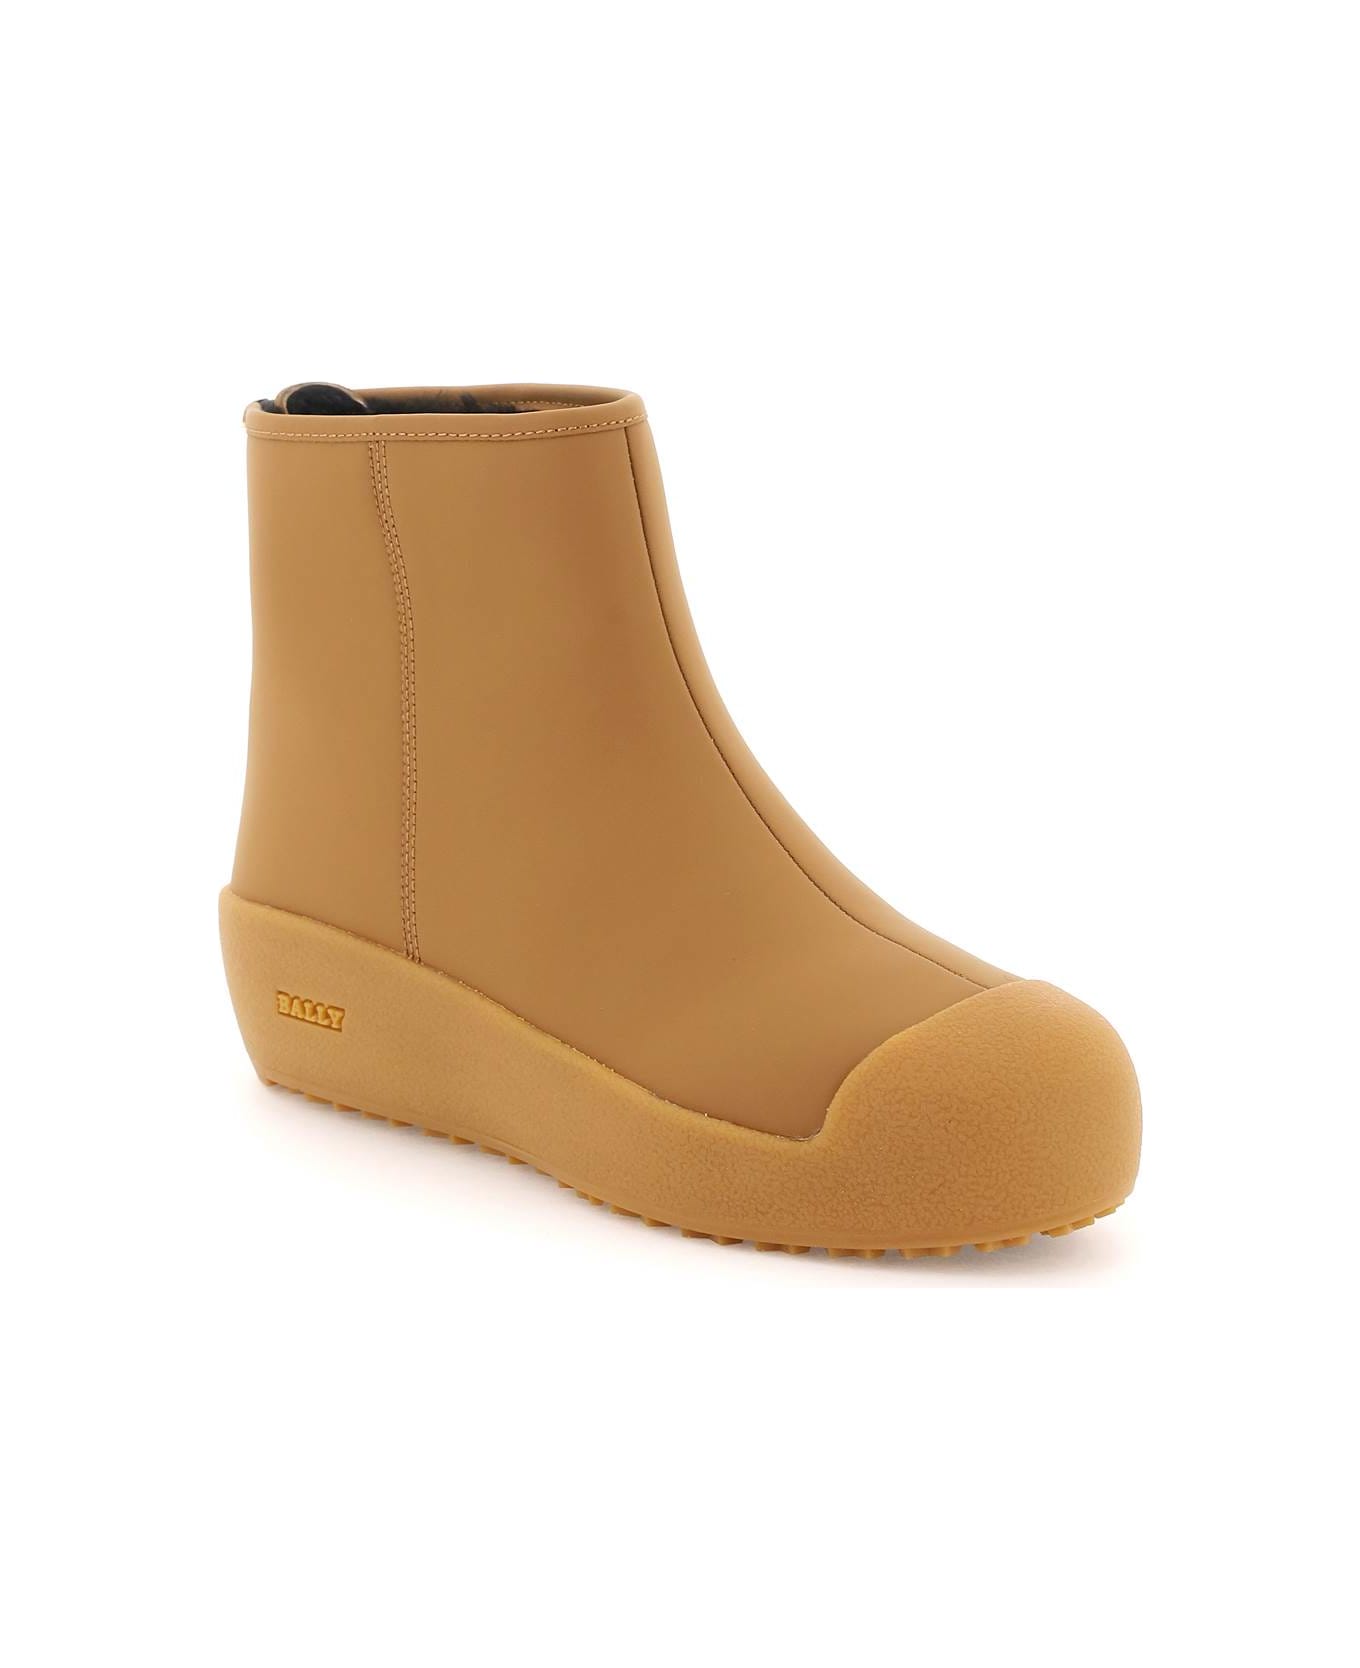 Bally 'bernina' Leather Ankle Boots - CAMEL 50 (Beige) ブーツ